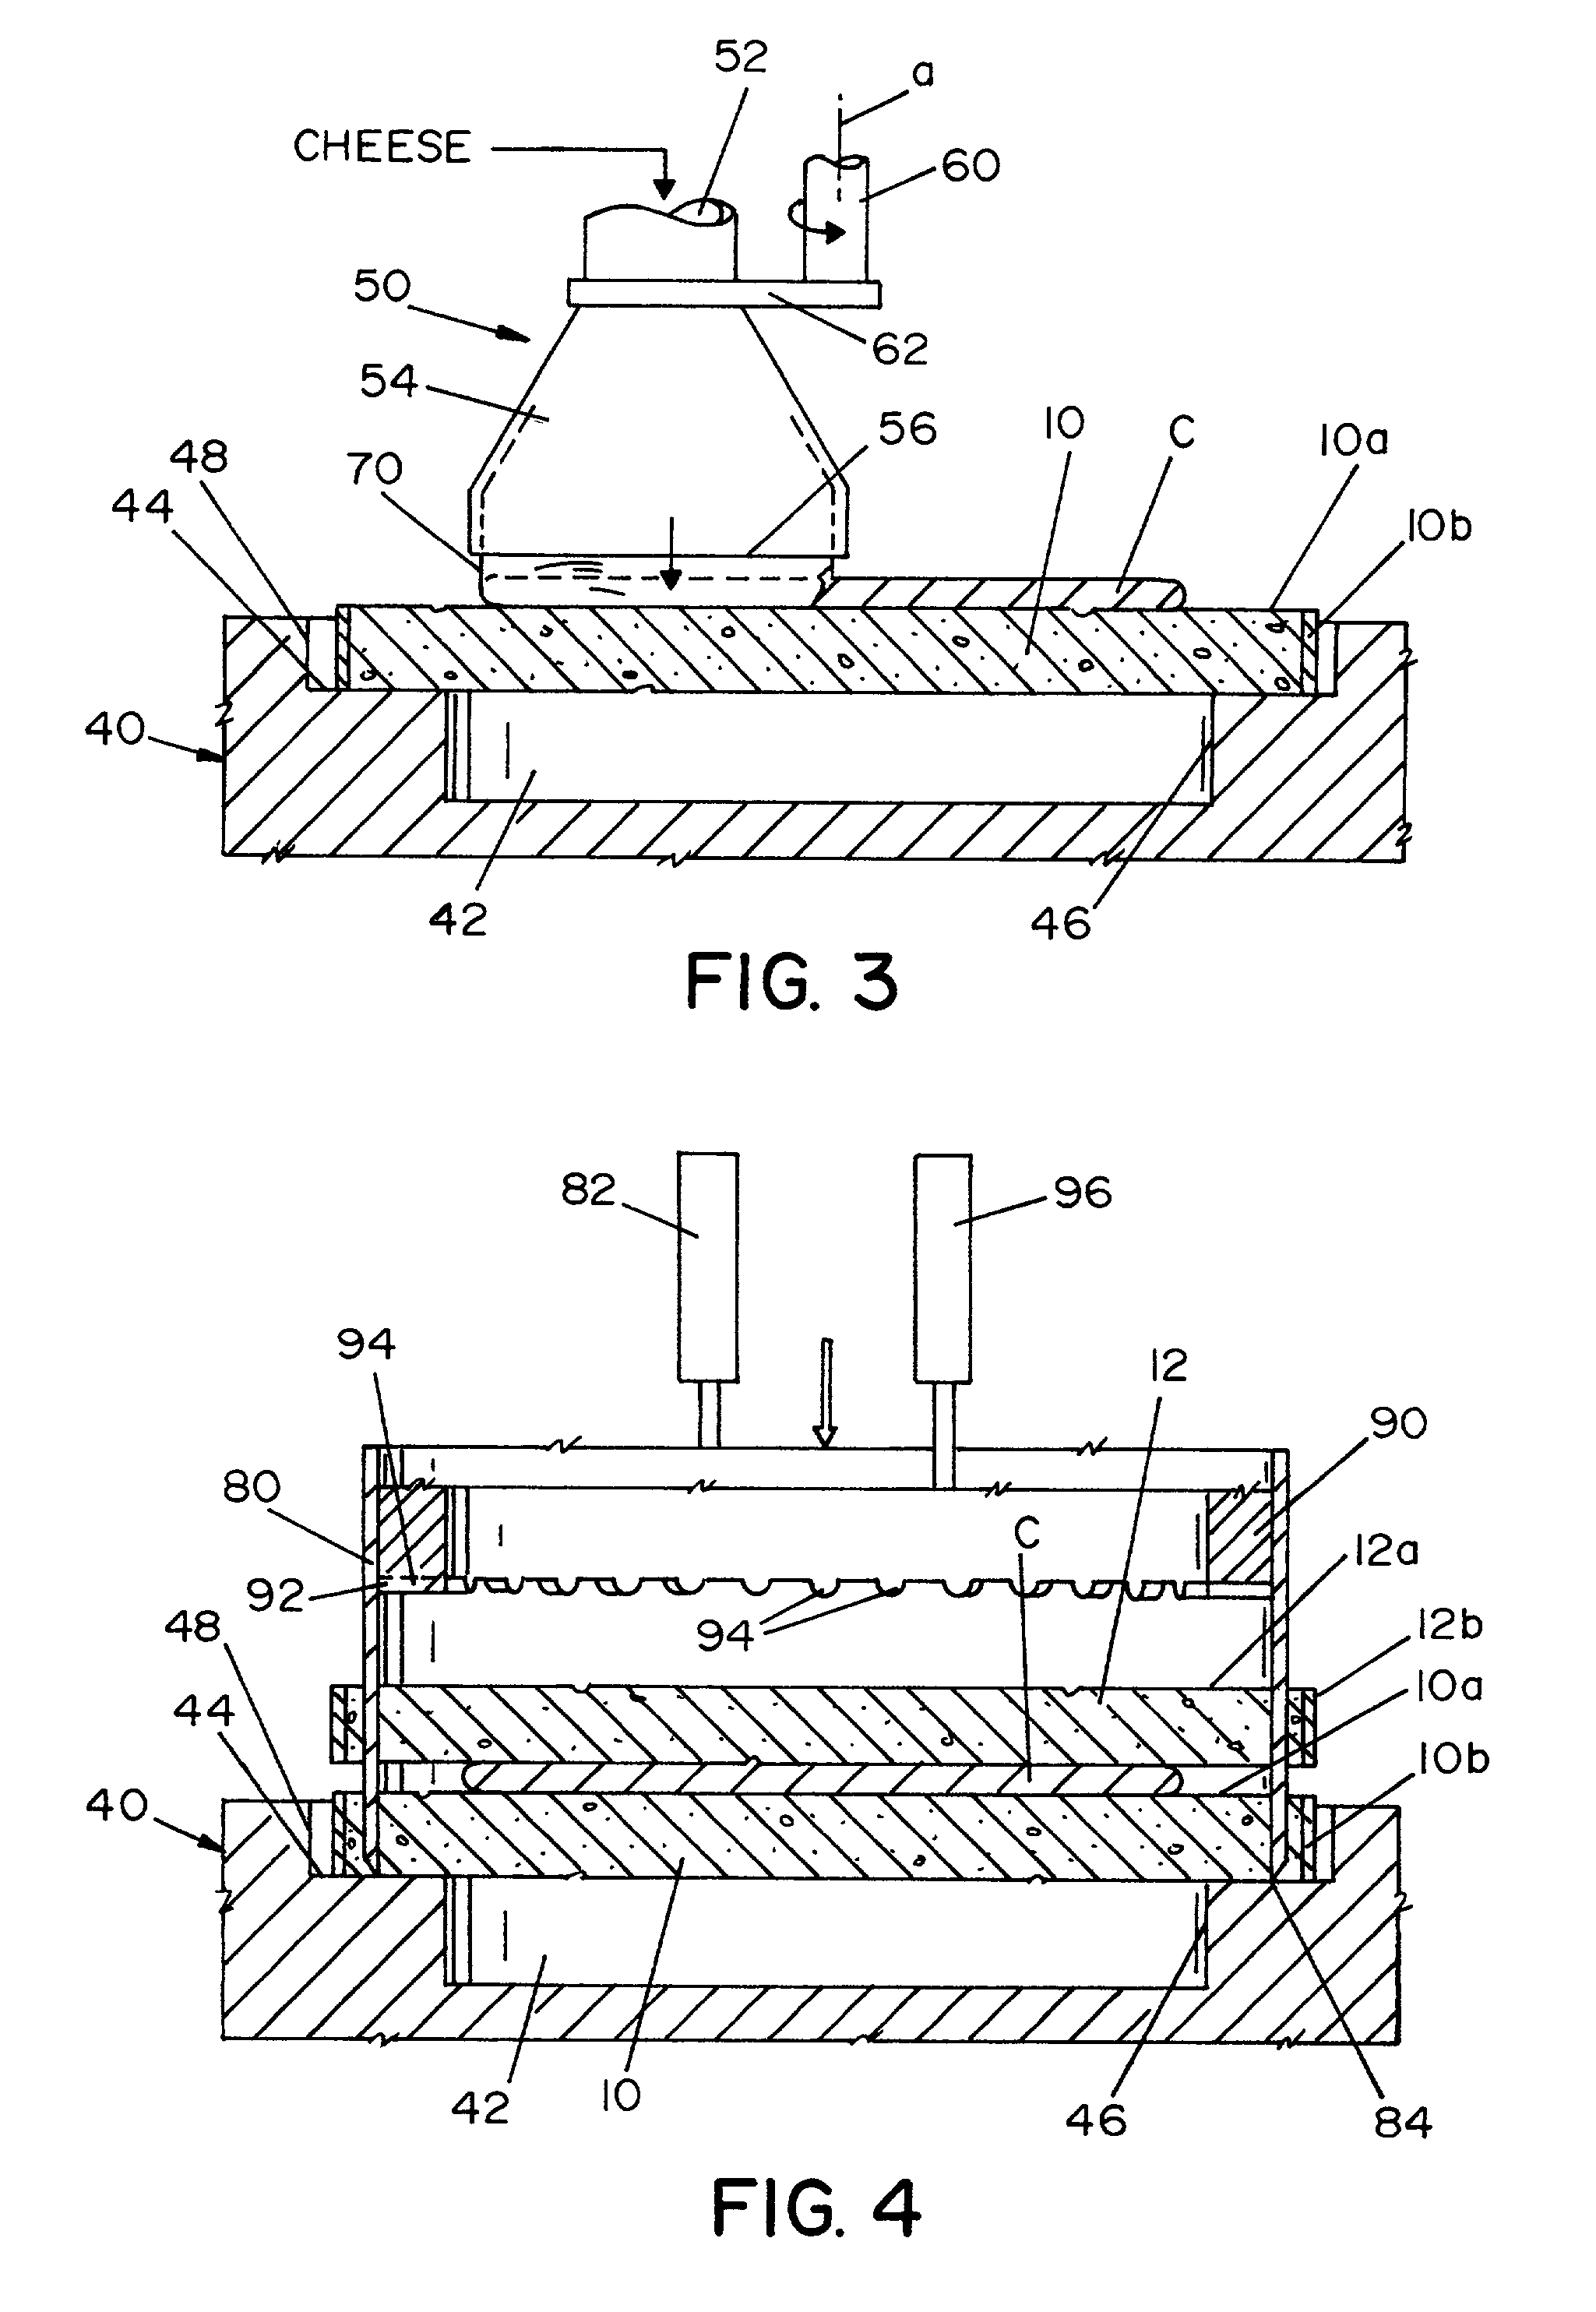 Frozen crustless sliced sandwich and method and apparatus for making same